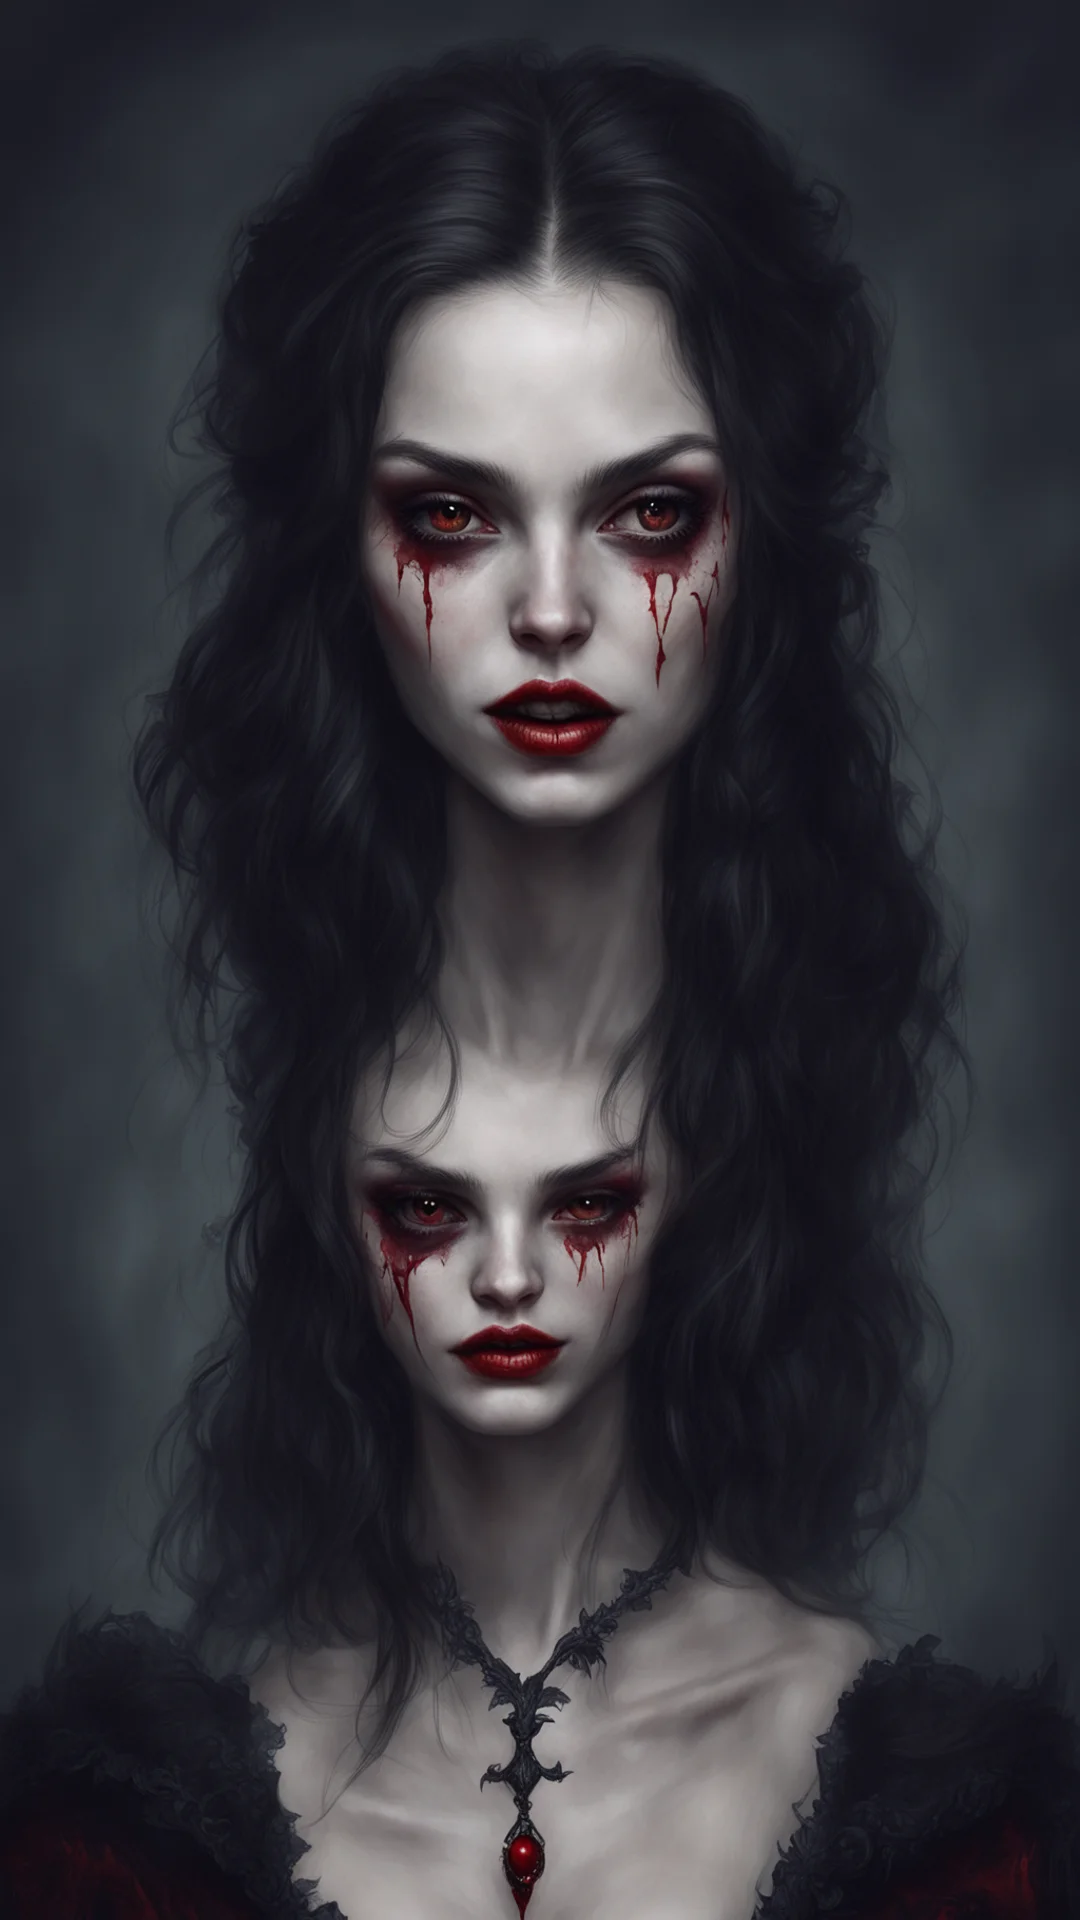 aiamazing portrait of a vampire girl by anato finnstark ar 23 awesome portrait 2 tall